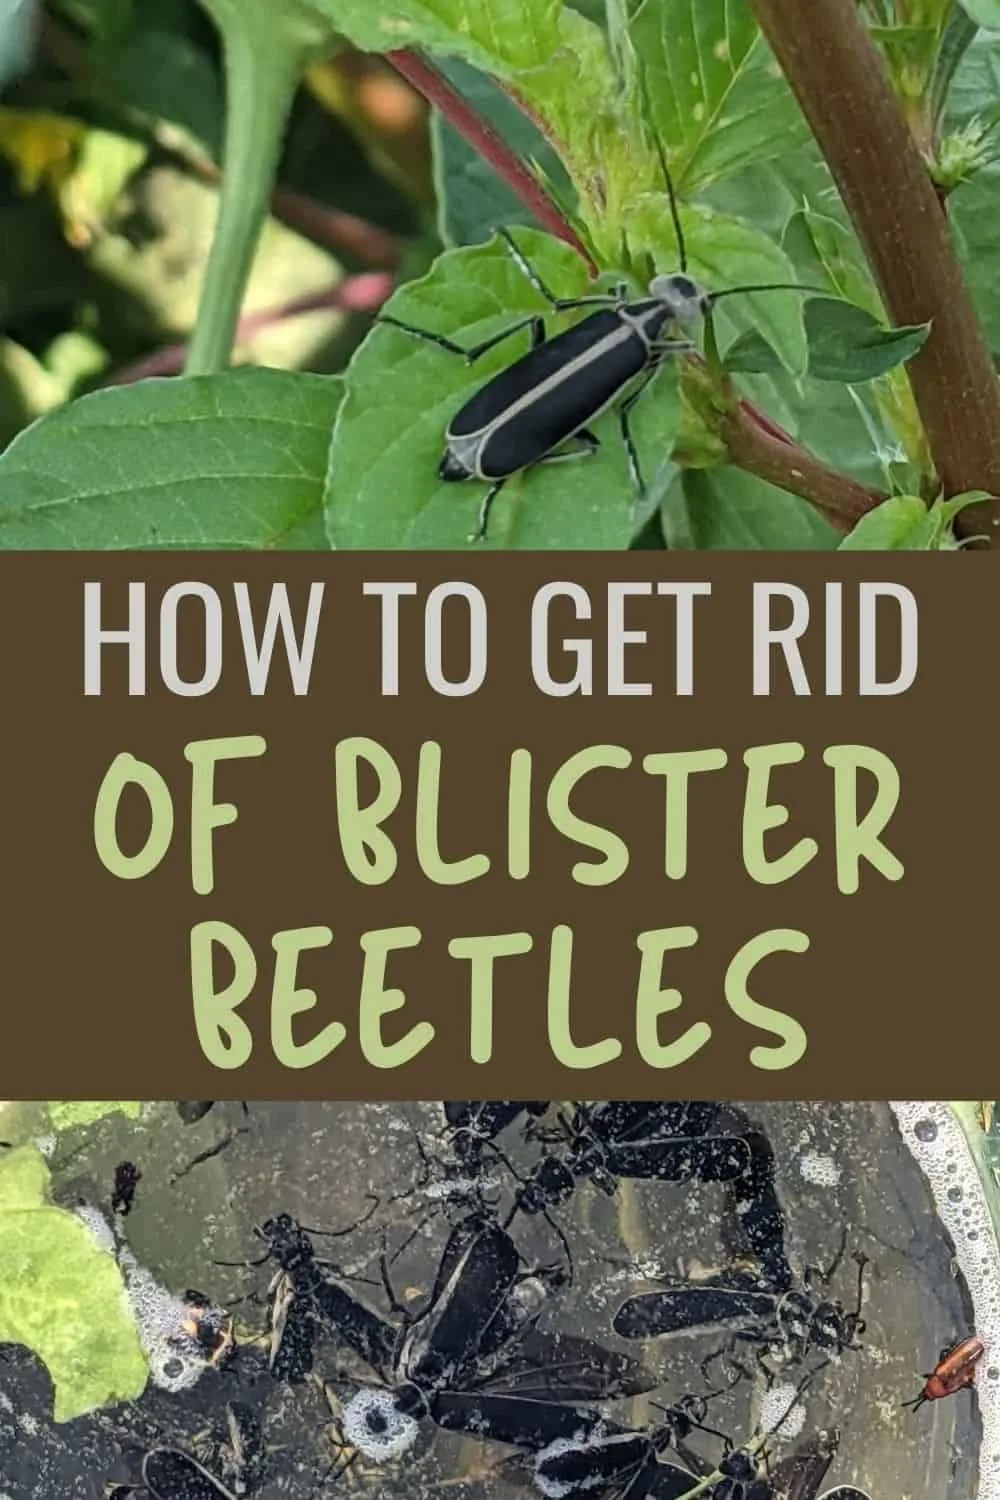 How to get rid of blister beetles